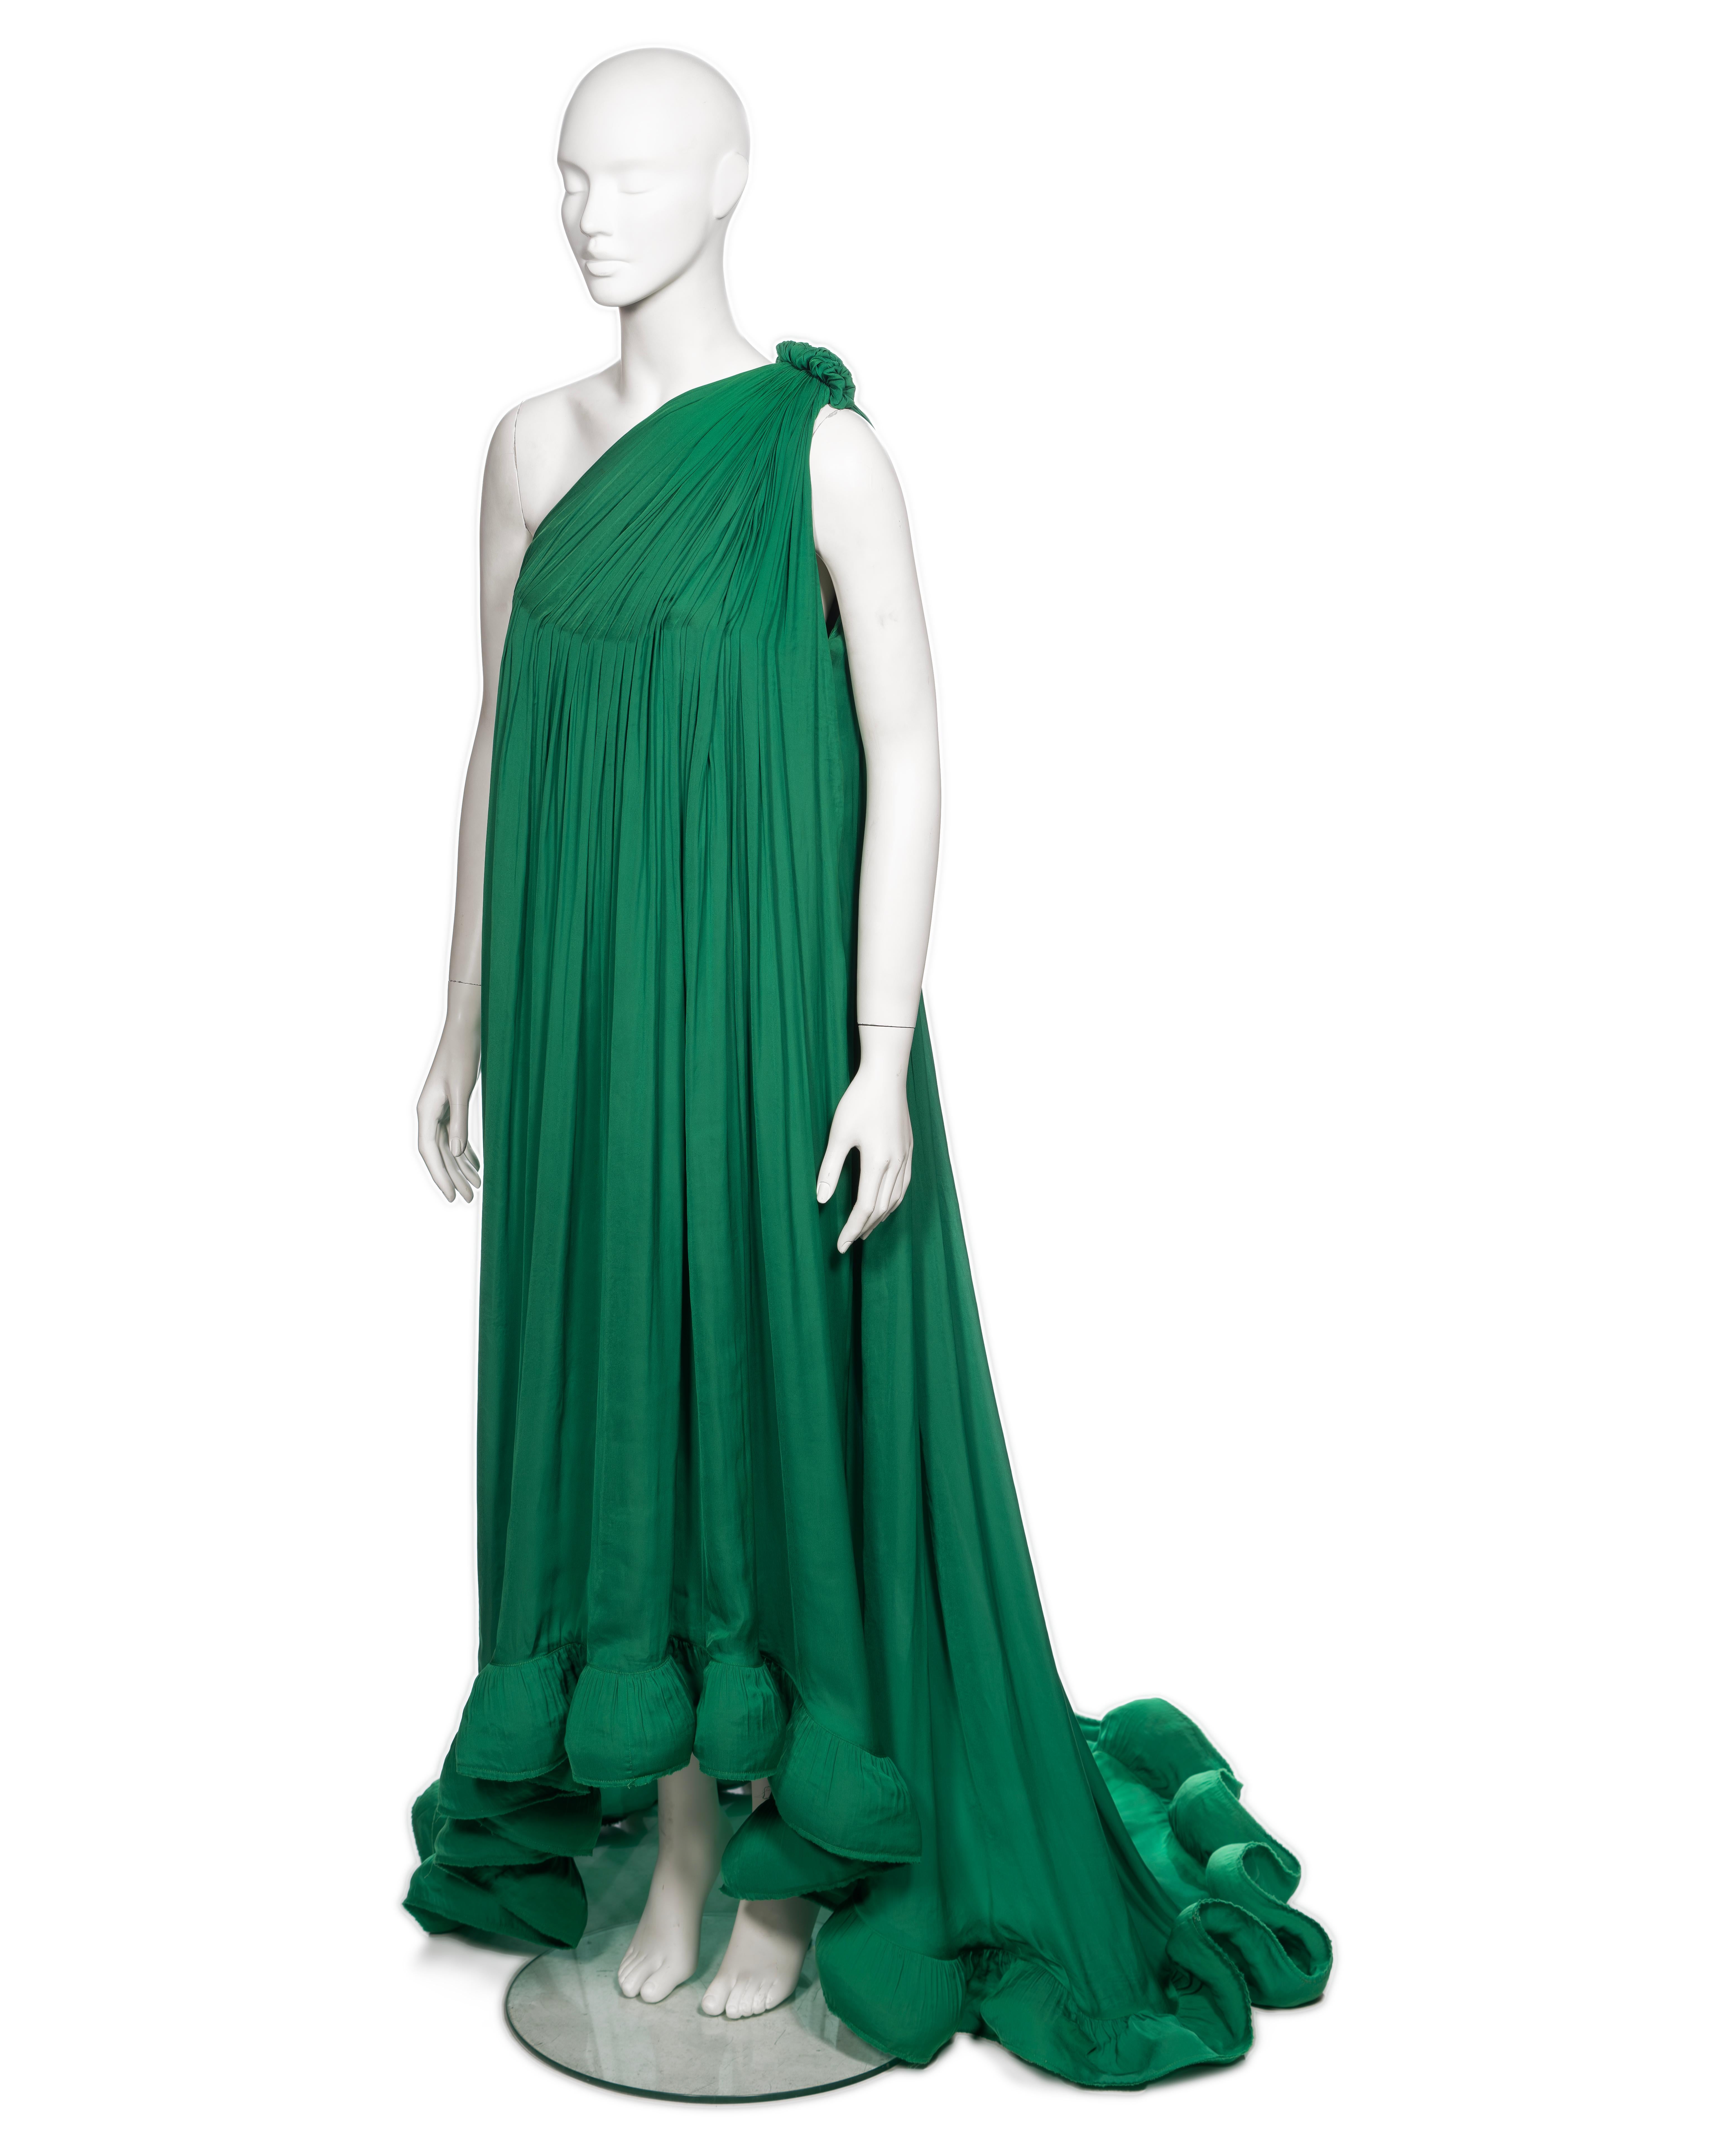 Lanvin by Alber Elbaz Green Pleated One-Shoulder Evening Dress, SS 2008 For Sale 6